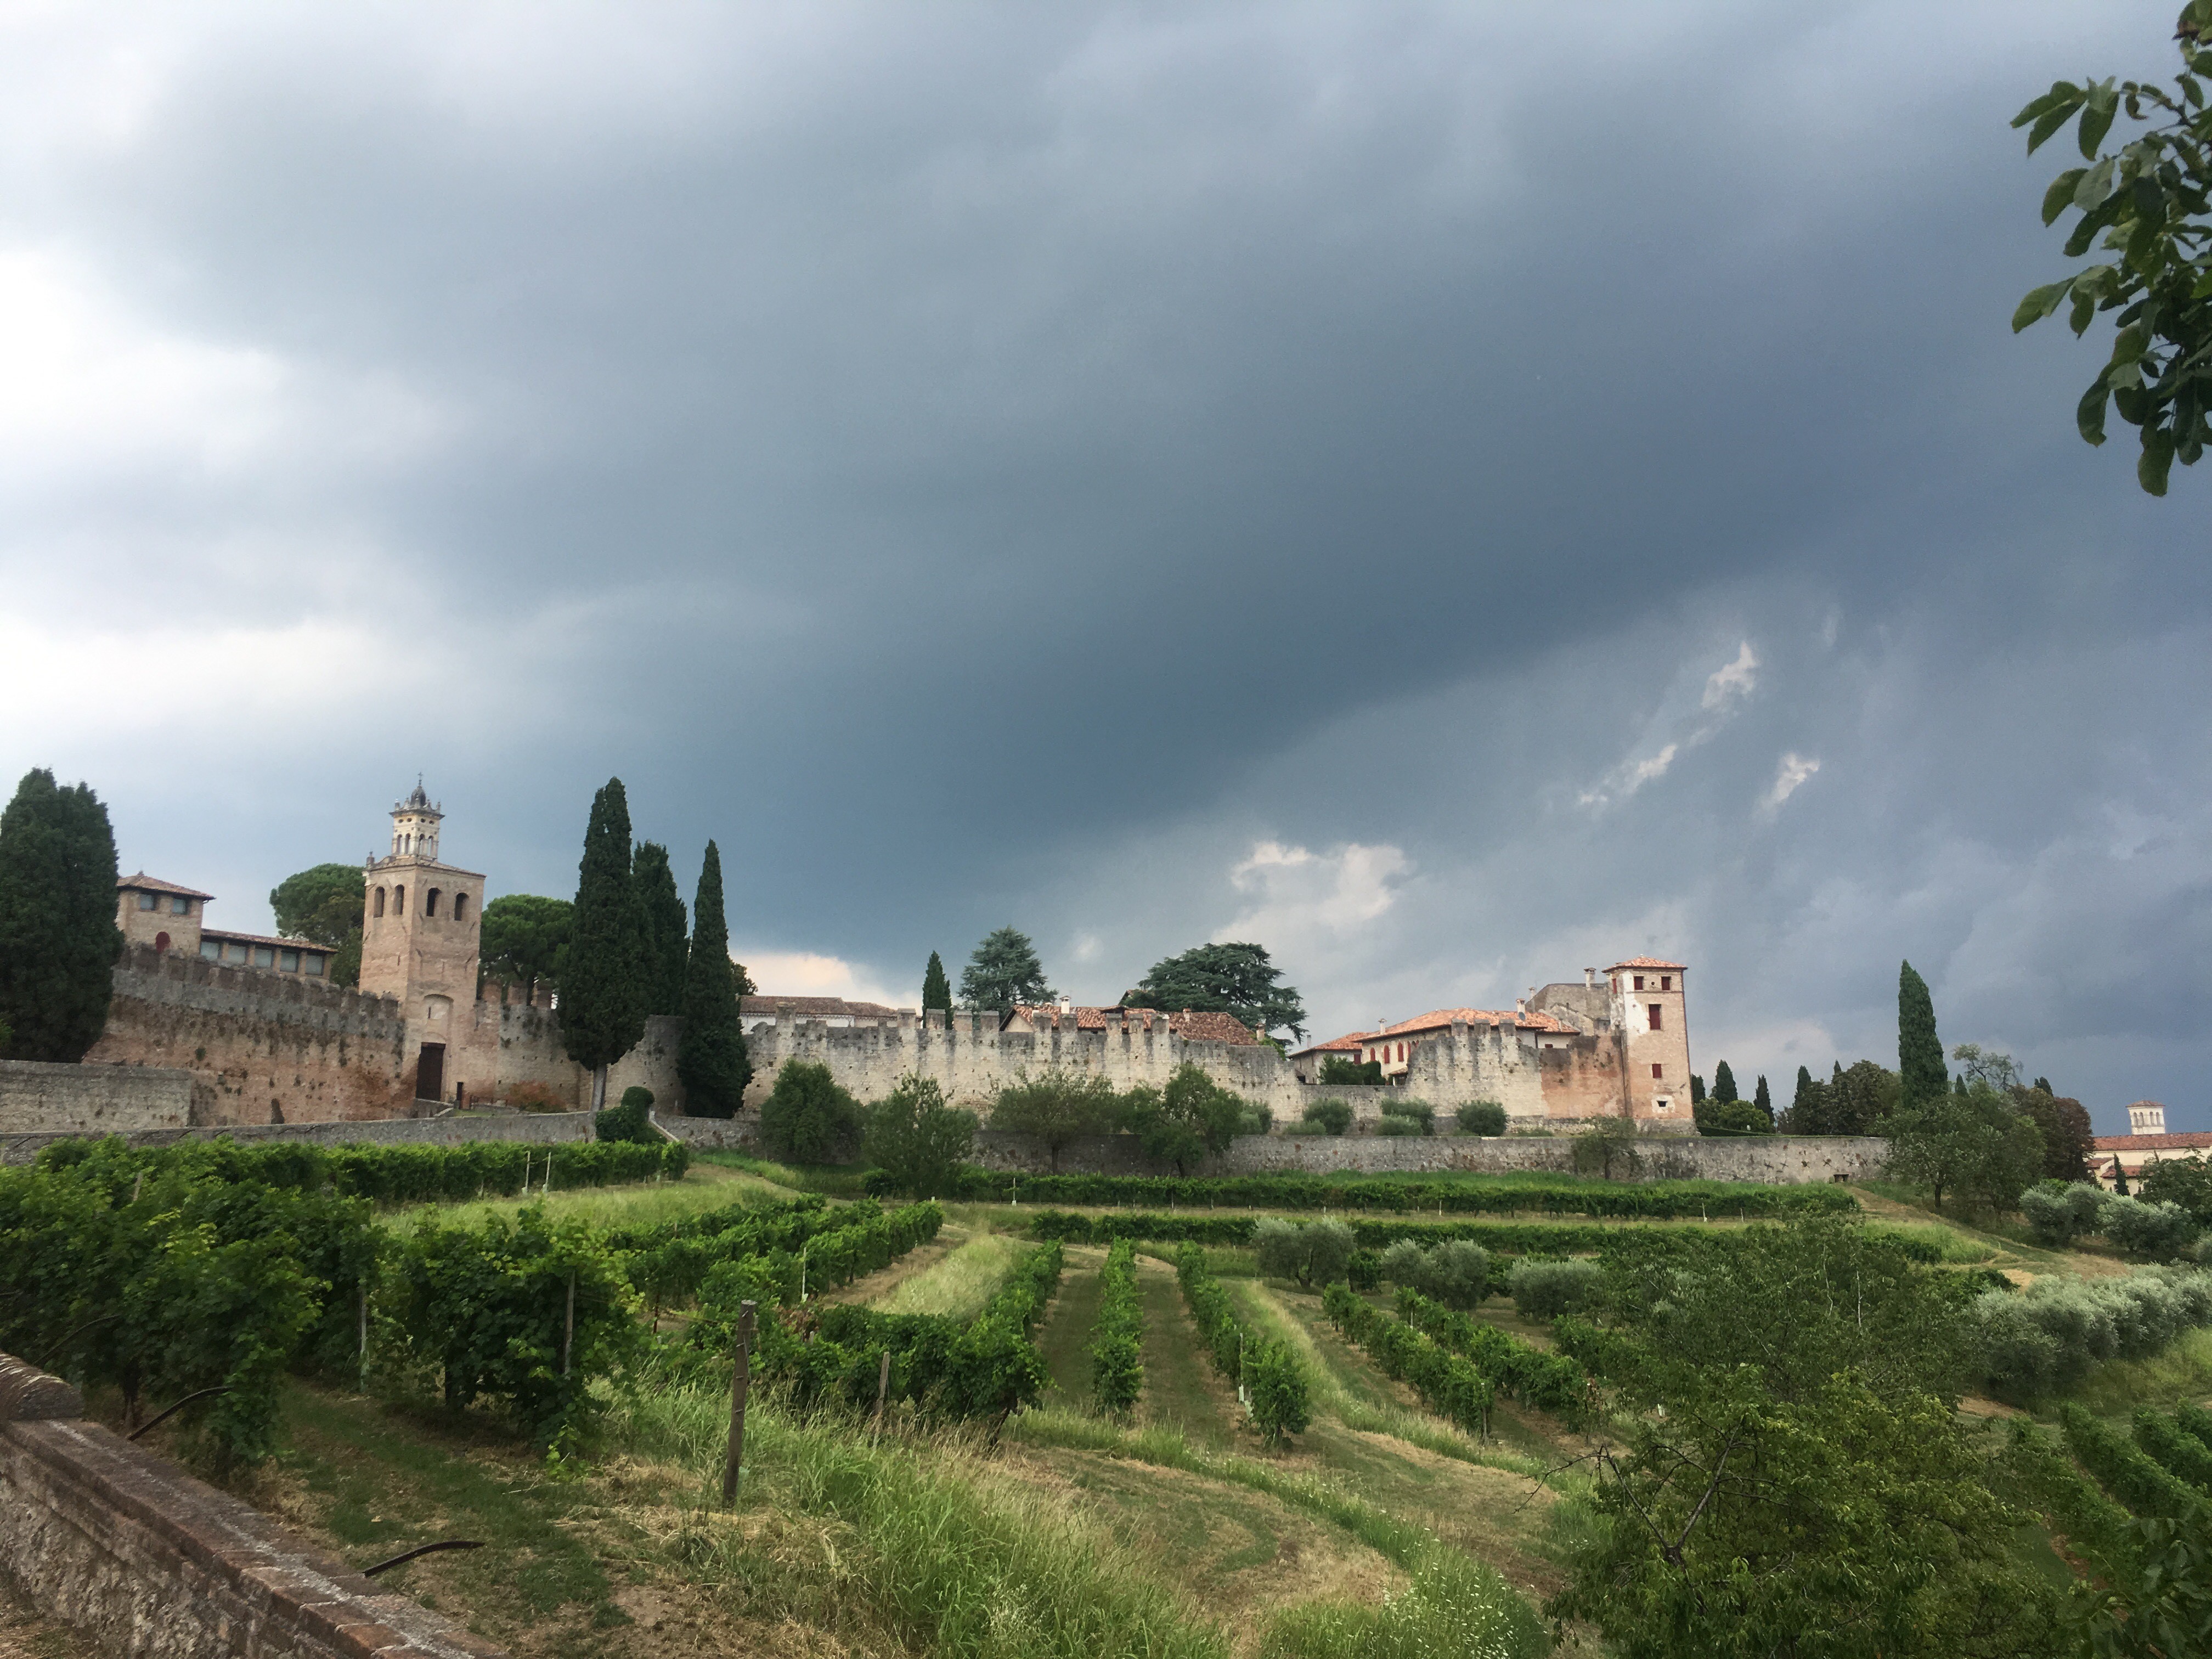 A beautiful Italian landscape with old, white buildings in the background, rolling green hills in the foreground, and stormy clouds brewing.